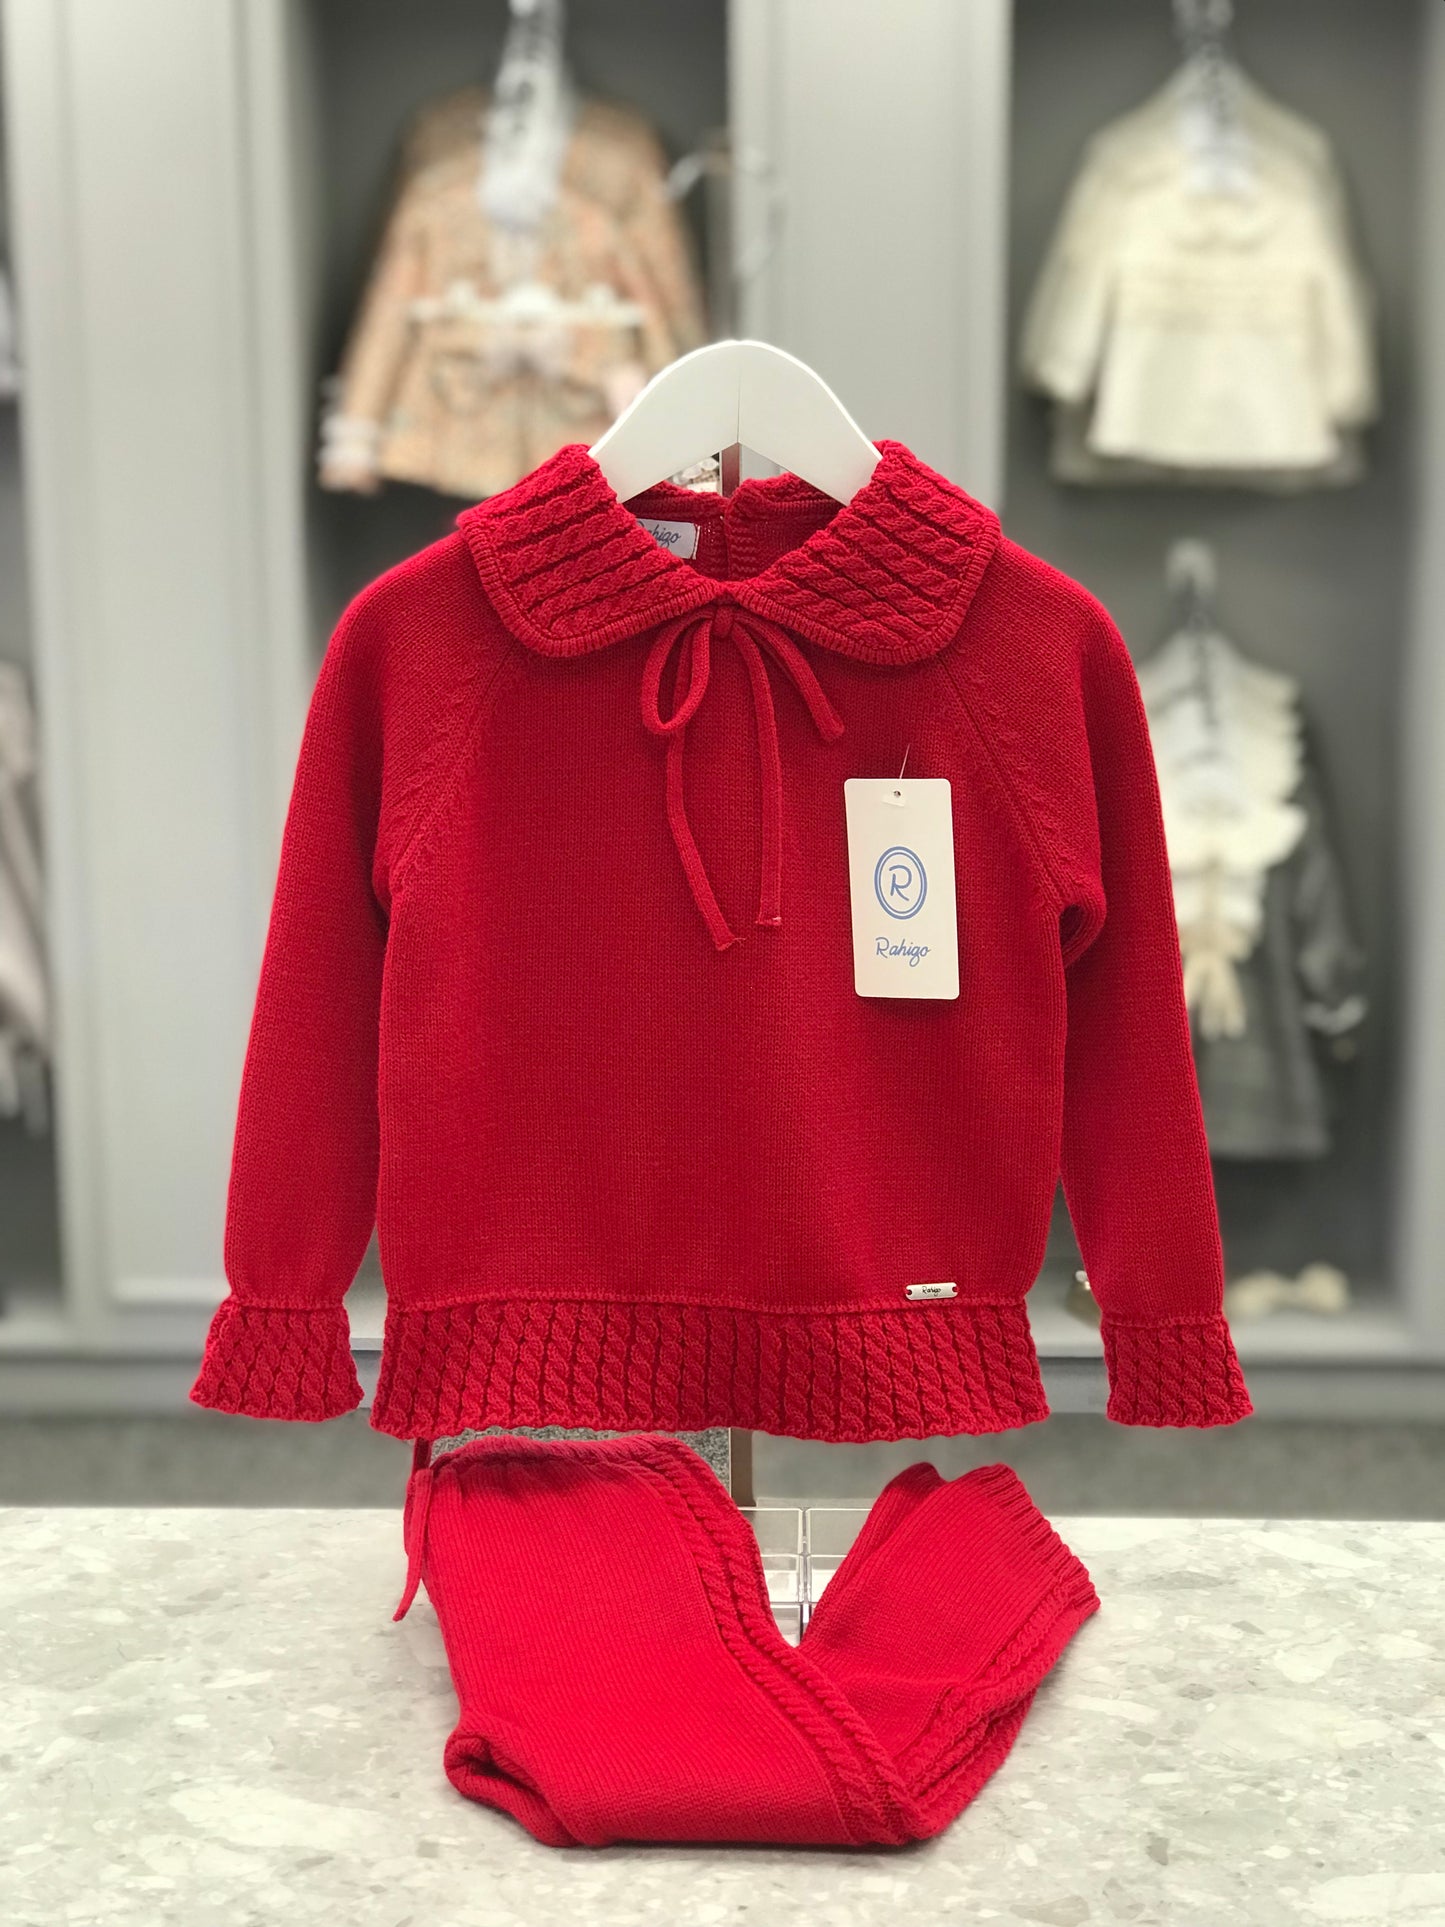 AW22 RAHIGO Girls Cable Knit Red Tracksuit - 22234